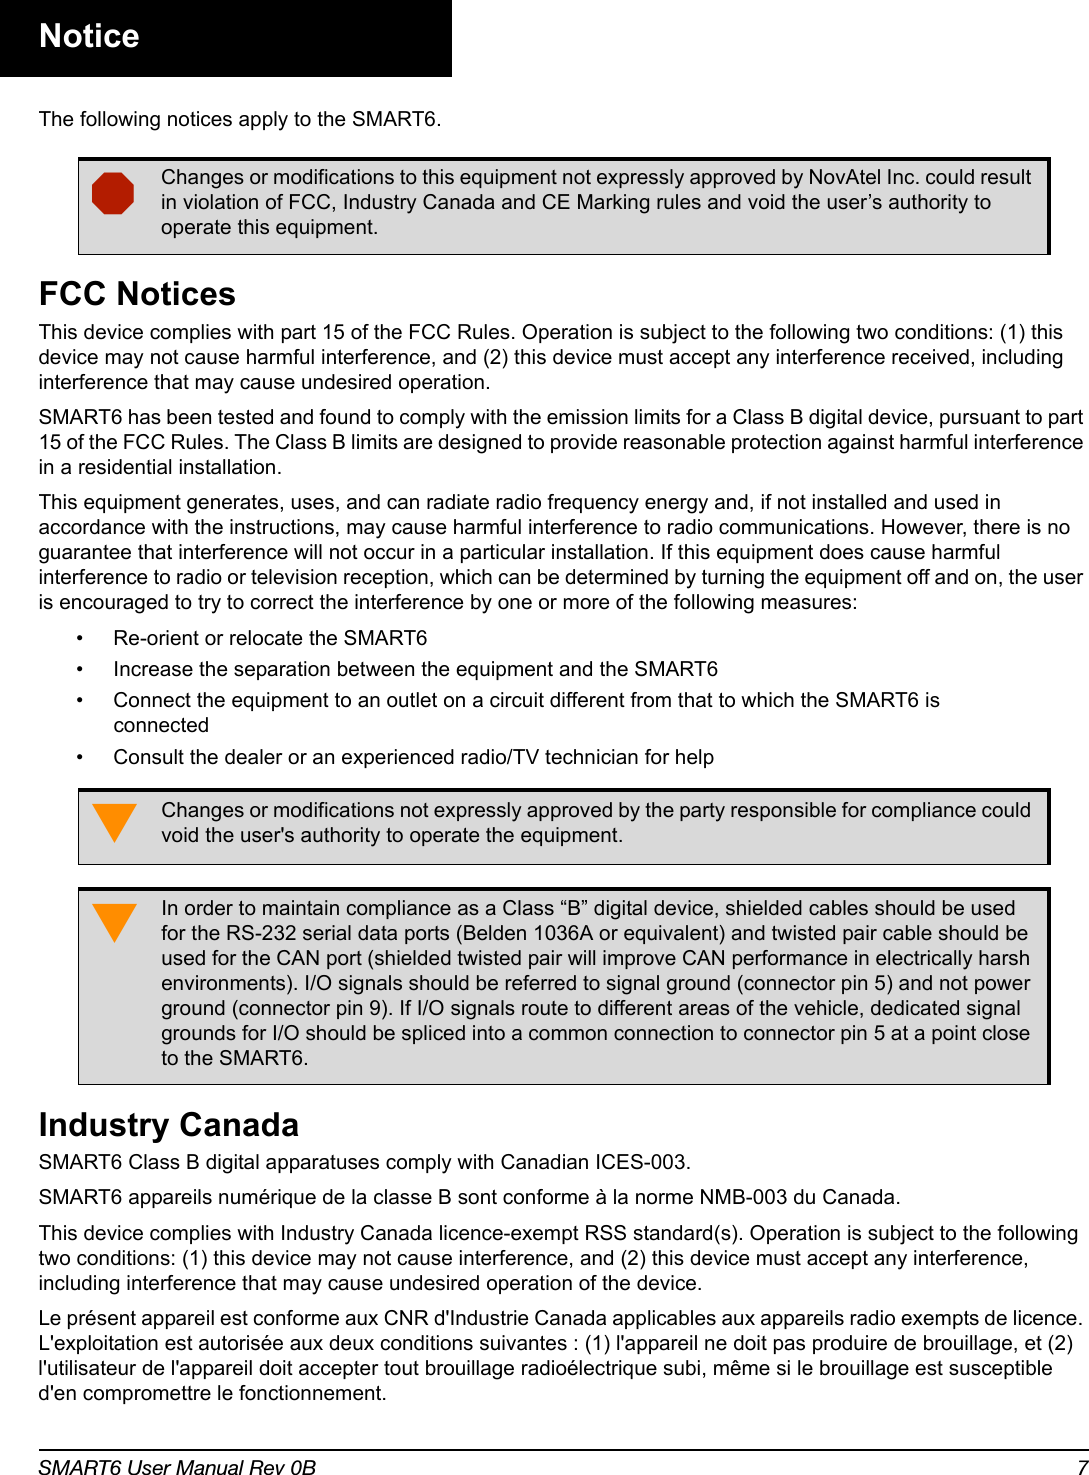 SMART6 User Manual Rev 0B 7NoticeThe following notices apply to the SMART6. FCC NoticesThis device complies with part 15 of the FCC Rules. Operation is subject to the following two conditions: (1) this device may not cause harmful interference, and (2) this device must accept any interference received, including interference that may cause undesired operation.SMART6 has been tested and found to comply with the emission limits for a Class B digital device, pursuant to part 15 of the FCC Rules. The Class B limits are designed to provide reasonable protection against harmful interference in a residential installation. This equipment generates, uses, and can radiate radio frequency energy and, if not installed and used in accordance with the instructions, may cause harmful interference to radio communications. However, there is no guarantee that interference will not occur in a particular installation. If this equipment does cause harmful interference to radio or television reception, which can be determined by turning the equipment off and on, the user is encouraged to try to correct the interference by one or more of the following measures:• Re-orient or relocate the SMART6• Increase the separation between the equipment and the SMART6• Connect the equipment to an outlet on a circuit different from that to which the SMART6 is connected• Consult the dealer or an experienced radio/TV technician for helpIndustry CanadaSMART6 Class B digital apparatuses comply with Canadian ICES-003.SMART6 appareils numérique de la classe B sont conforme à la norme NMB-003 du Canada.This device complies with Industry Canada licence-exempt RSS standard(s). Operation is subject to the following two conditions: (1) this device may not cause interference, and (2) this device must accept any interference, including interference that may cause undesired operation of the device.Le présent appareil est conforme aux CNR d&apos;Industrie Canada applicables aux appareils radio exempts de licence. L&apos;exploitation est autorisée aux deux conditions suivantes : (1) l&apos;appareil ne doit pas produire de brouillage, et (2) l&apos;utilisateur de l&apos;appareil doit accepter tout brouillage radioélectrique subi, même si le brouillage est susceptible d&apos;en compromettre le fonctionnement.Changes or modifications to this equipment not expressly approved by NovAtel Inc. could result in violation of FCC, Industry Canada and CE Marking rules and void the user’s authority to operate this equipment.Changes or modifications not expressly approved by the party responsible for compliance could void the user&apos;s authority to operate the equipment.In order to maintain compliance as a Class “B” digital device, shielded cables should be used for the RS-232 serial data ports (Belden 1036A or equivalent) and twisted pair cable should be used for the CAN port (shielded twisted pair will improve CAN performance in electrically harsh environments). I/O signals should be referred to signal ground (connector pin 5) and not power ground (connector pin 9). If I/O signals route to different areas of the vehicle, dedicated signal grounds for I/O should be spliced into a common connection to connector pin 5 at a point close to the SMART6.